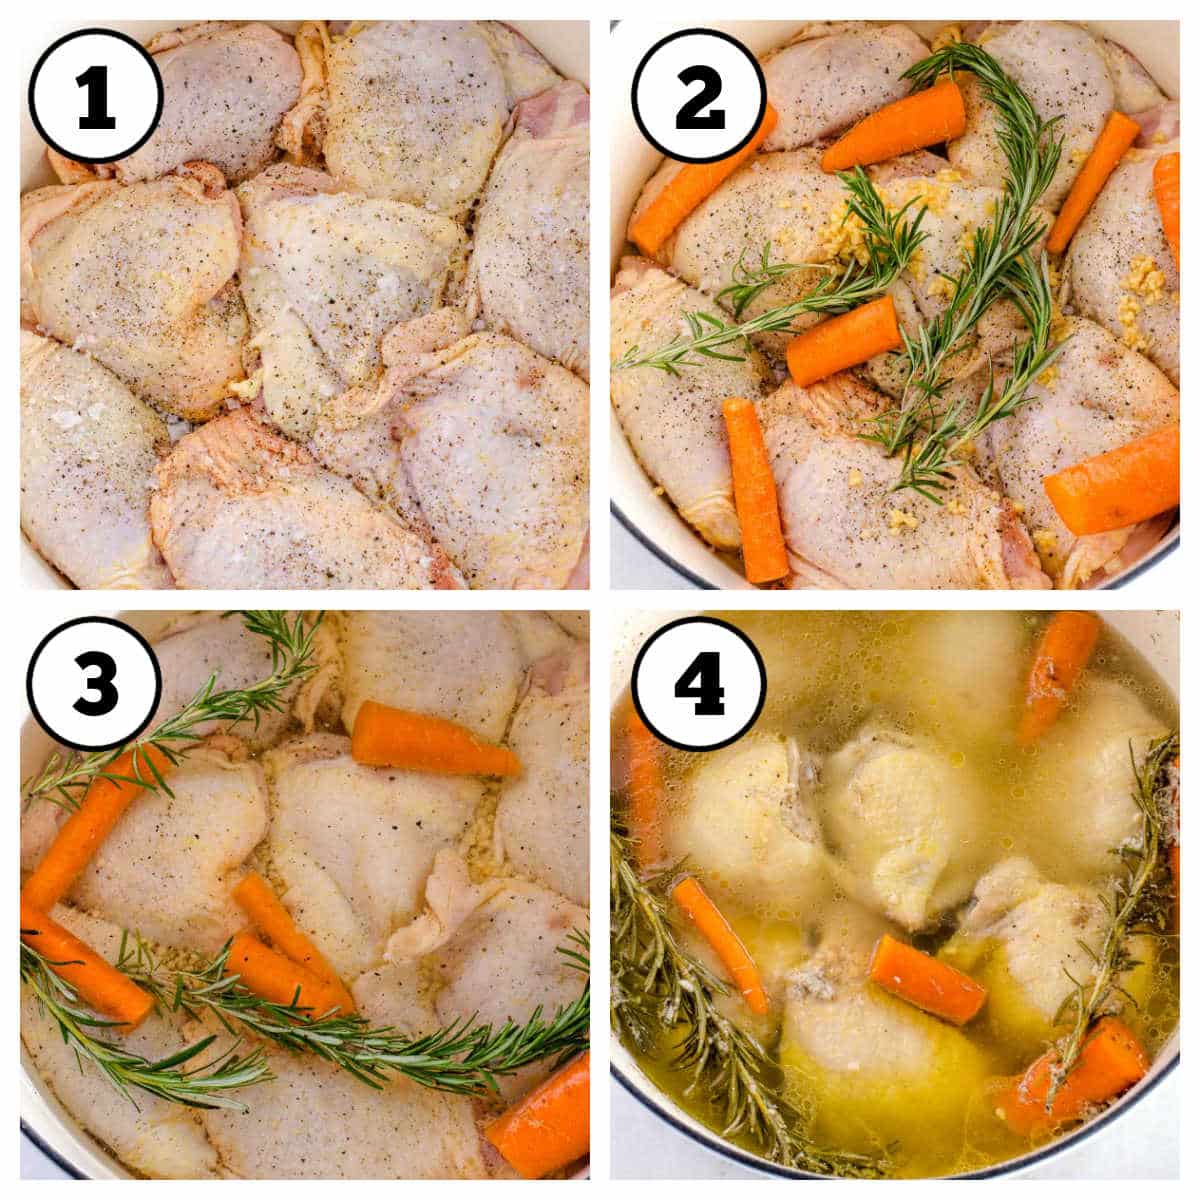 Steps 1-4 of how to boil bone-in chicken thighs.